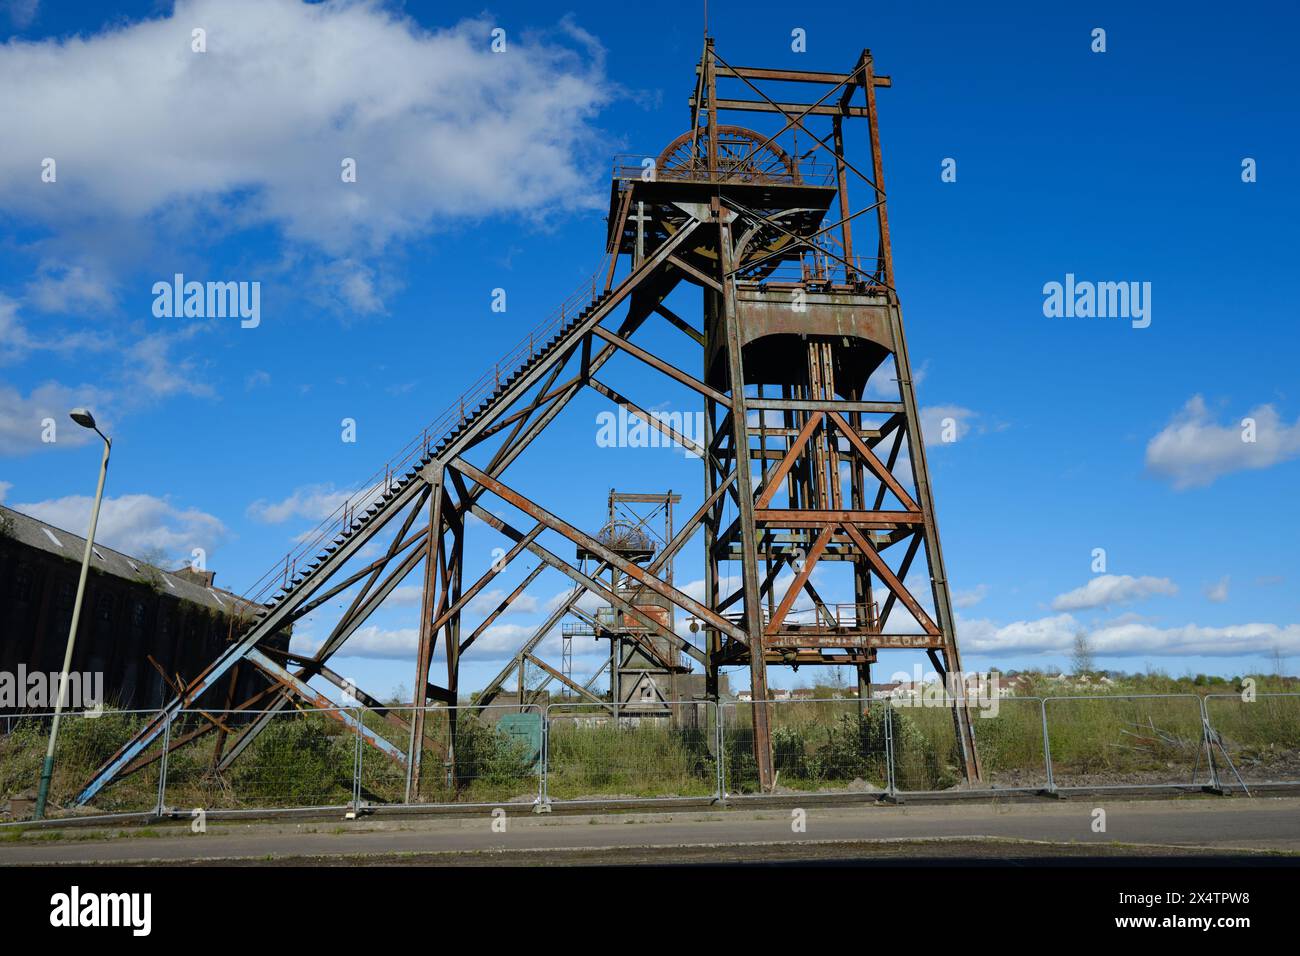 Ruins at the abandoned Penallta Colliery in South Wales, UK Stock Photo